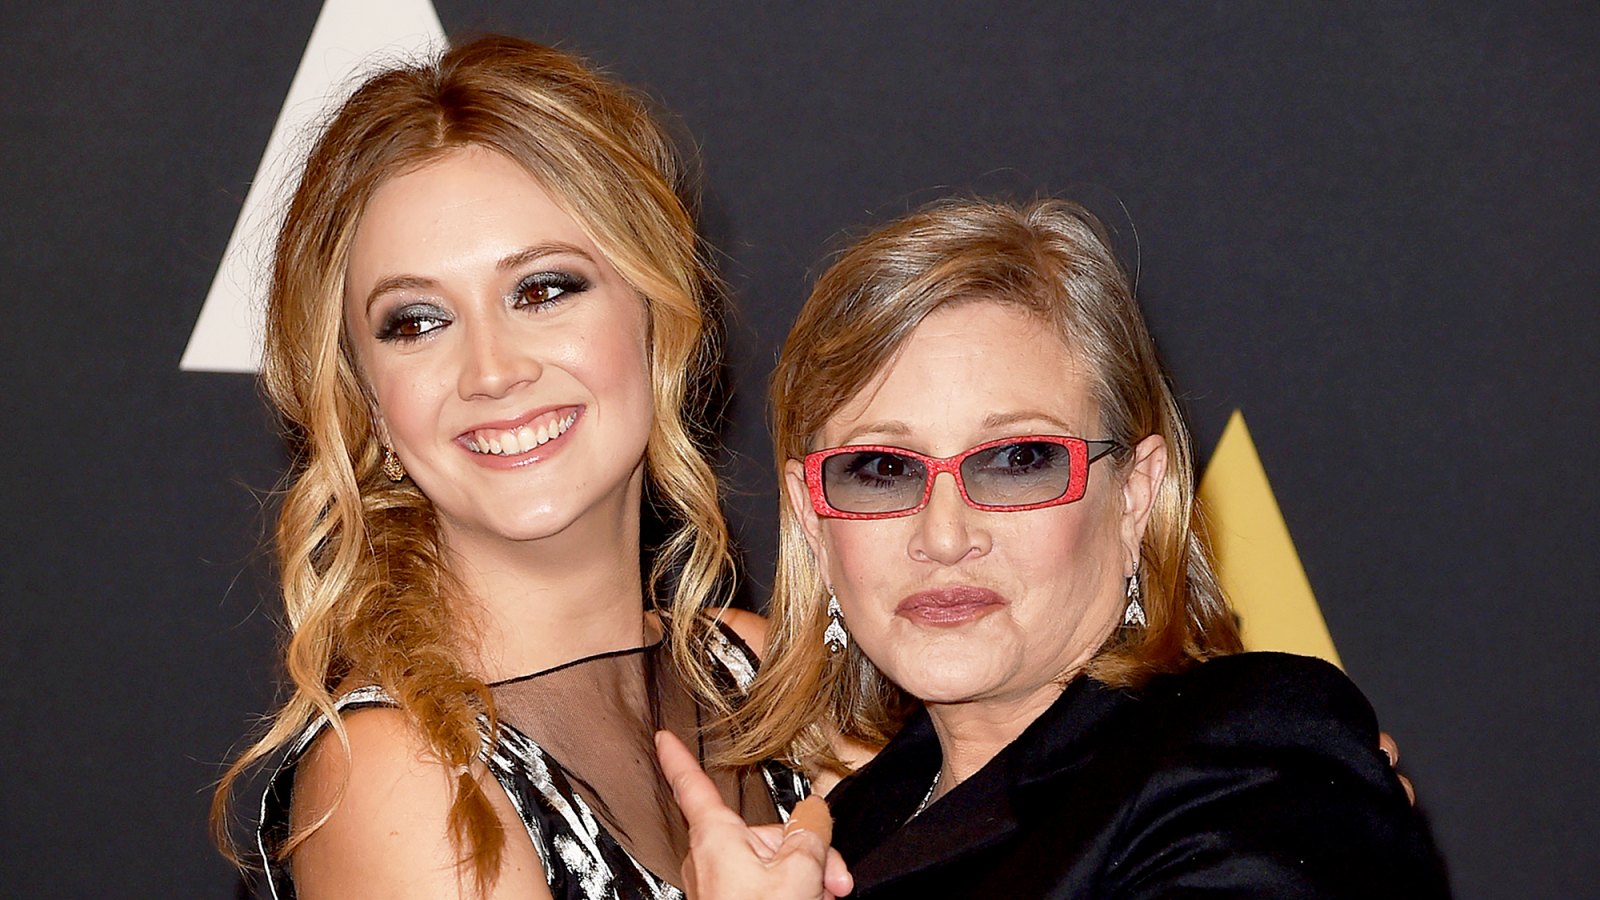 Carrie Fisher and Billie Catherine Lourd attend the Academy of Motion Picture Arts and Sciences' 7th annual Governors Awards at The Ray Dolby Ballroom at Hollywood & Highland Center on November 14, 2015 in Hollywood, California.